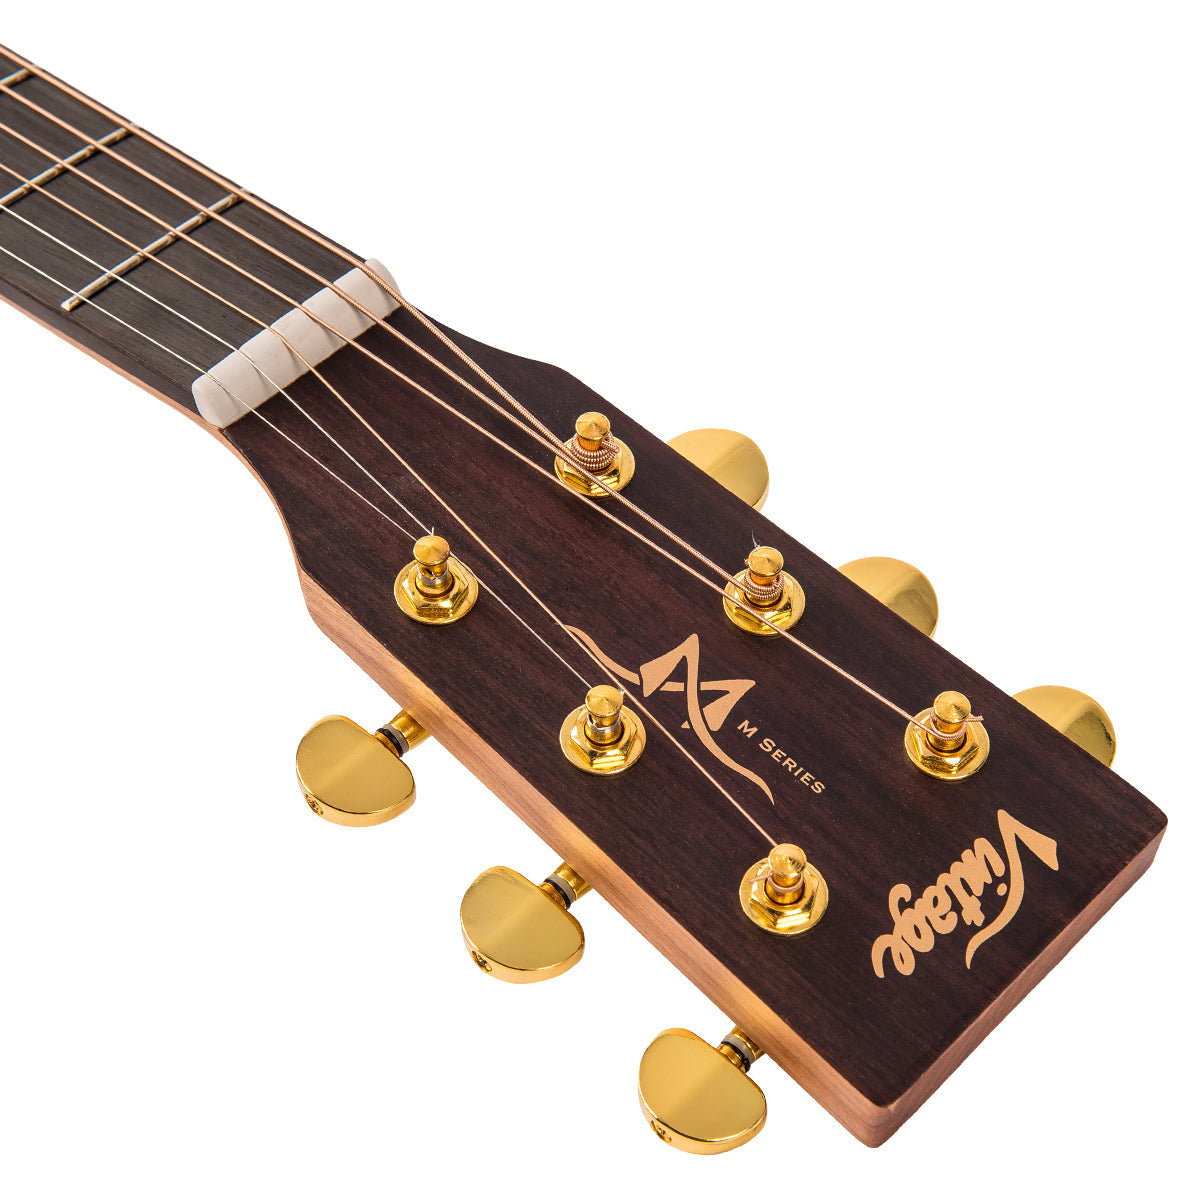 Vintage Mahogany Series 'Travel' Electro-Acoustic Guitar ~ Satin Mahogany, Electric Acoustic Guitars for sale at Richards Guitars.